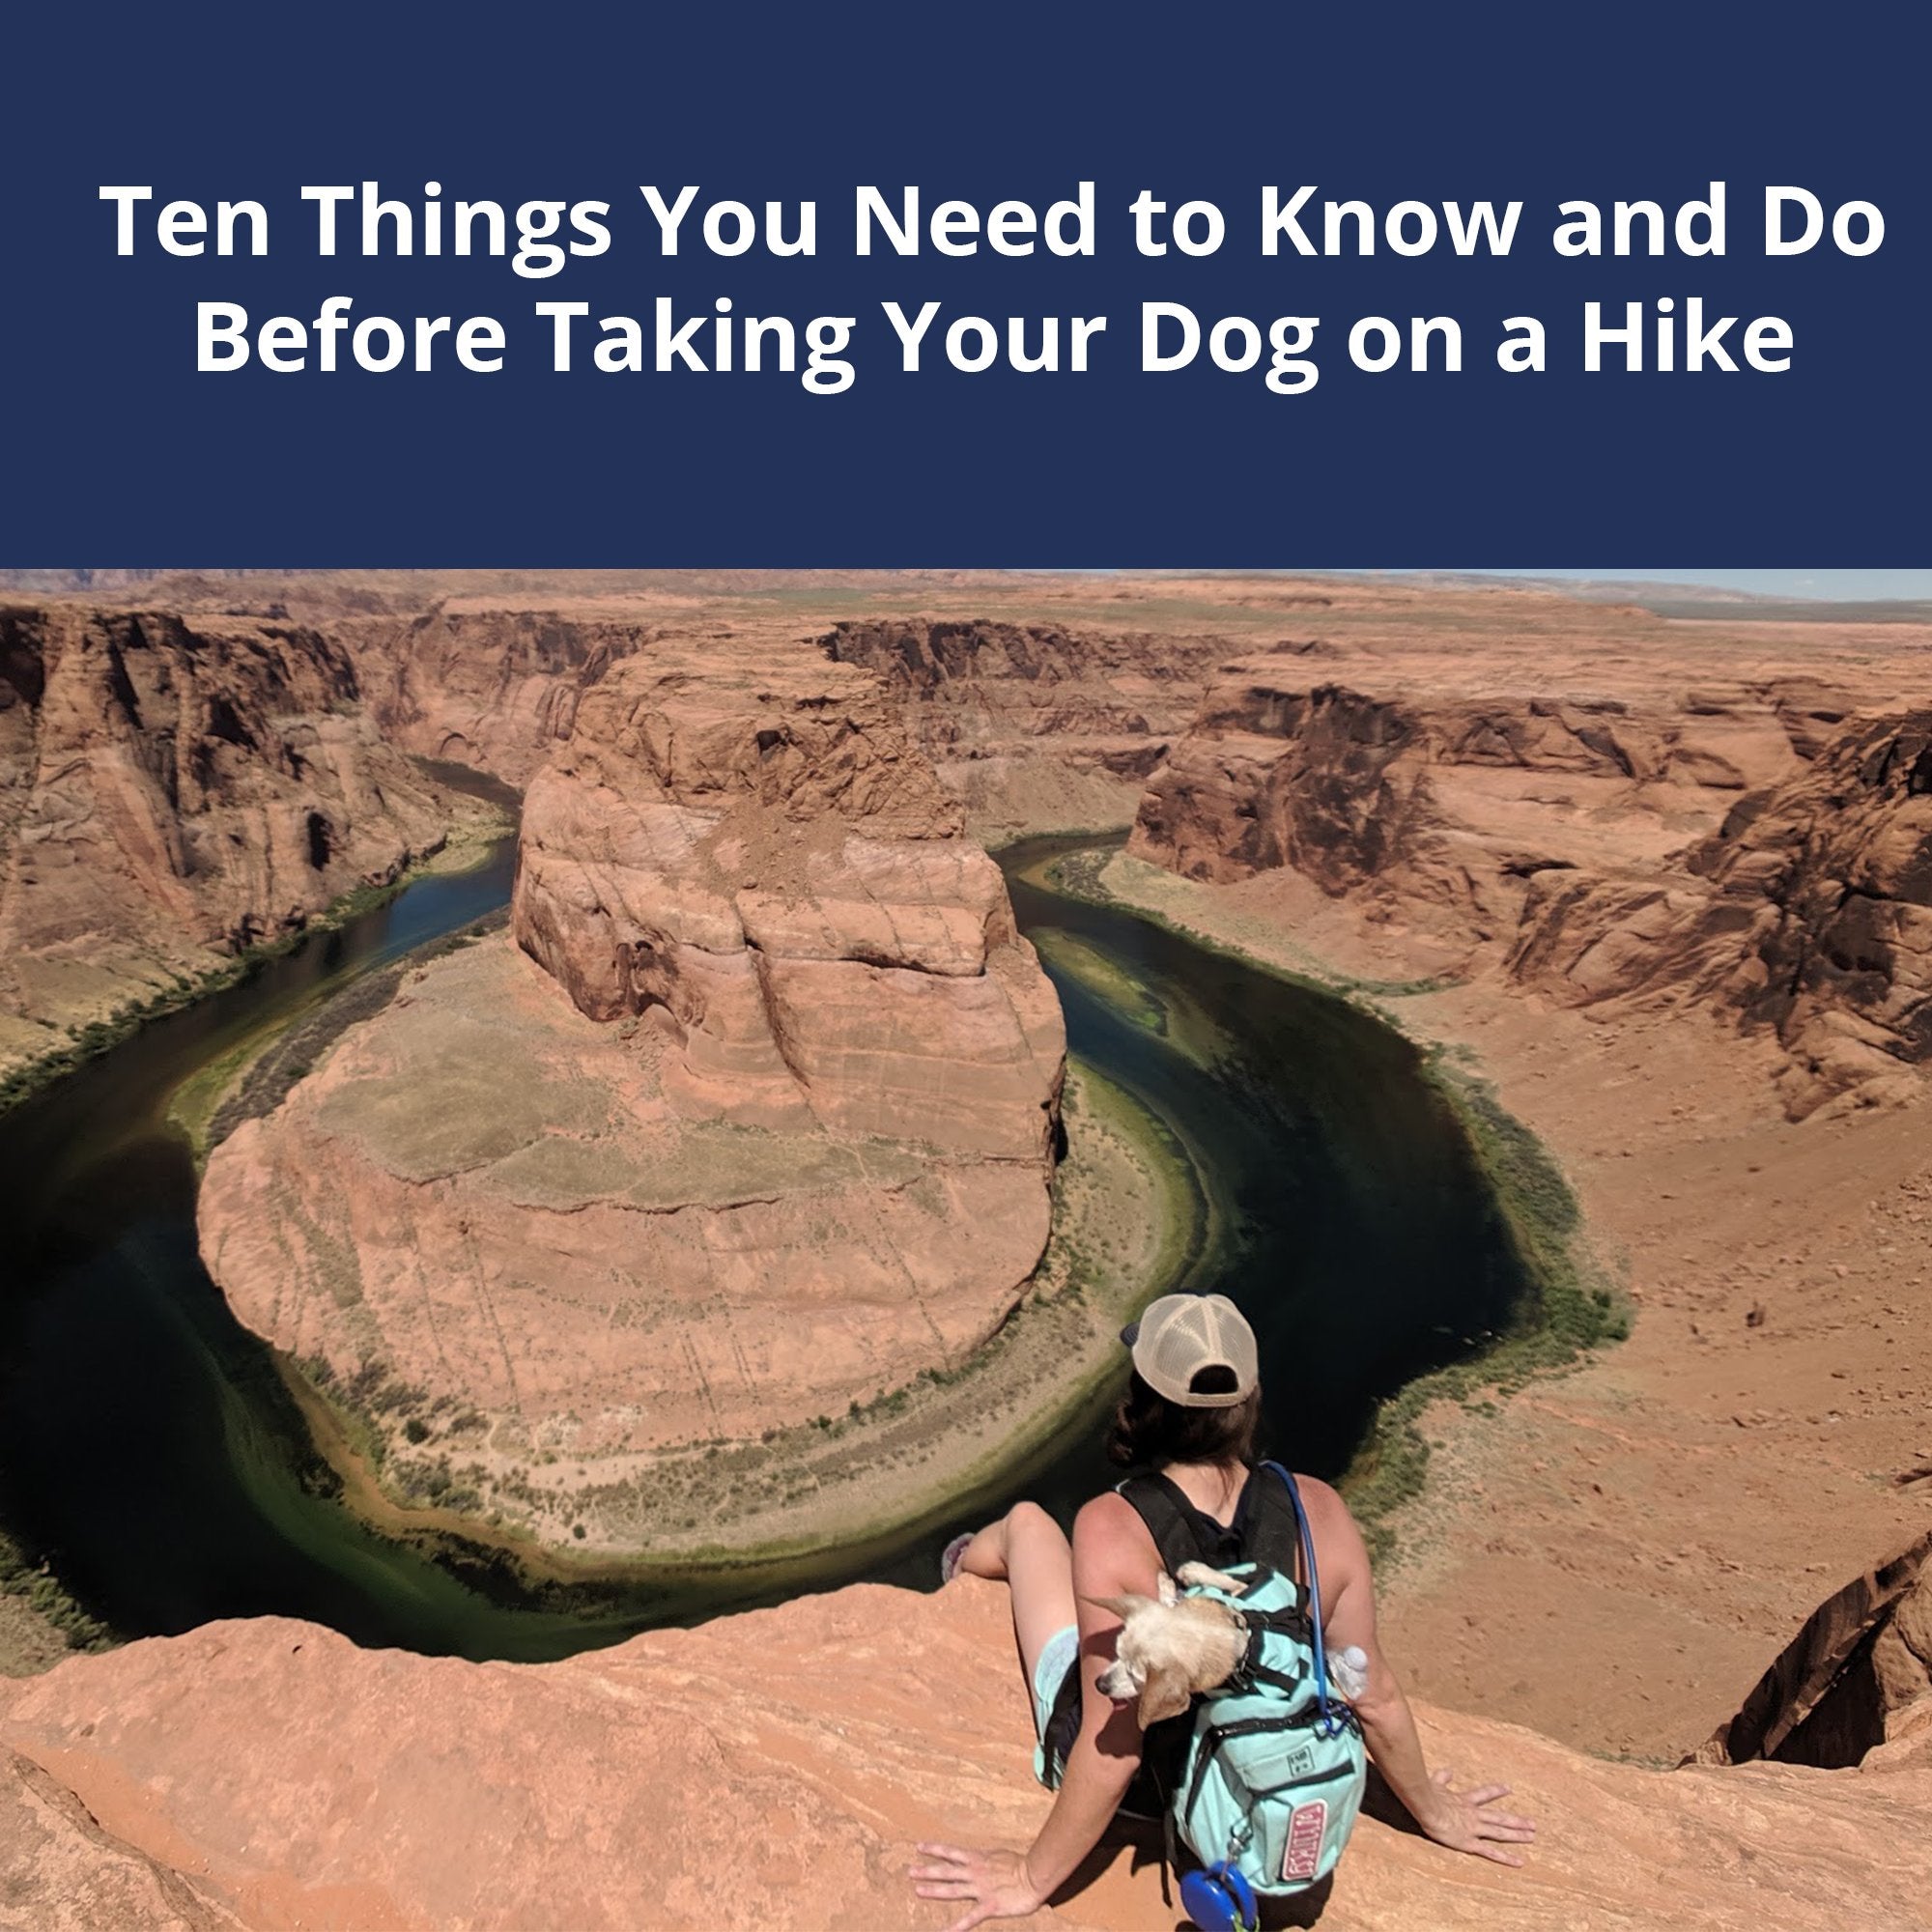 Taking Your Dog On a Hike